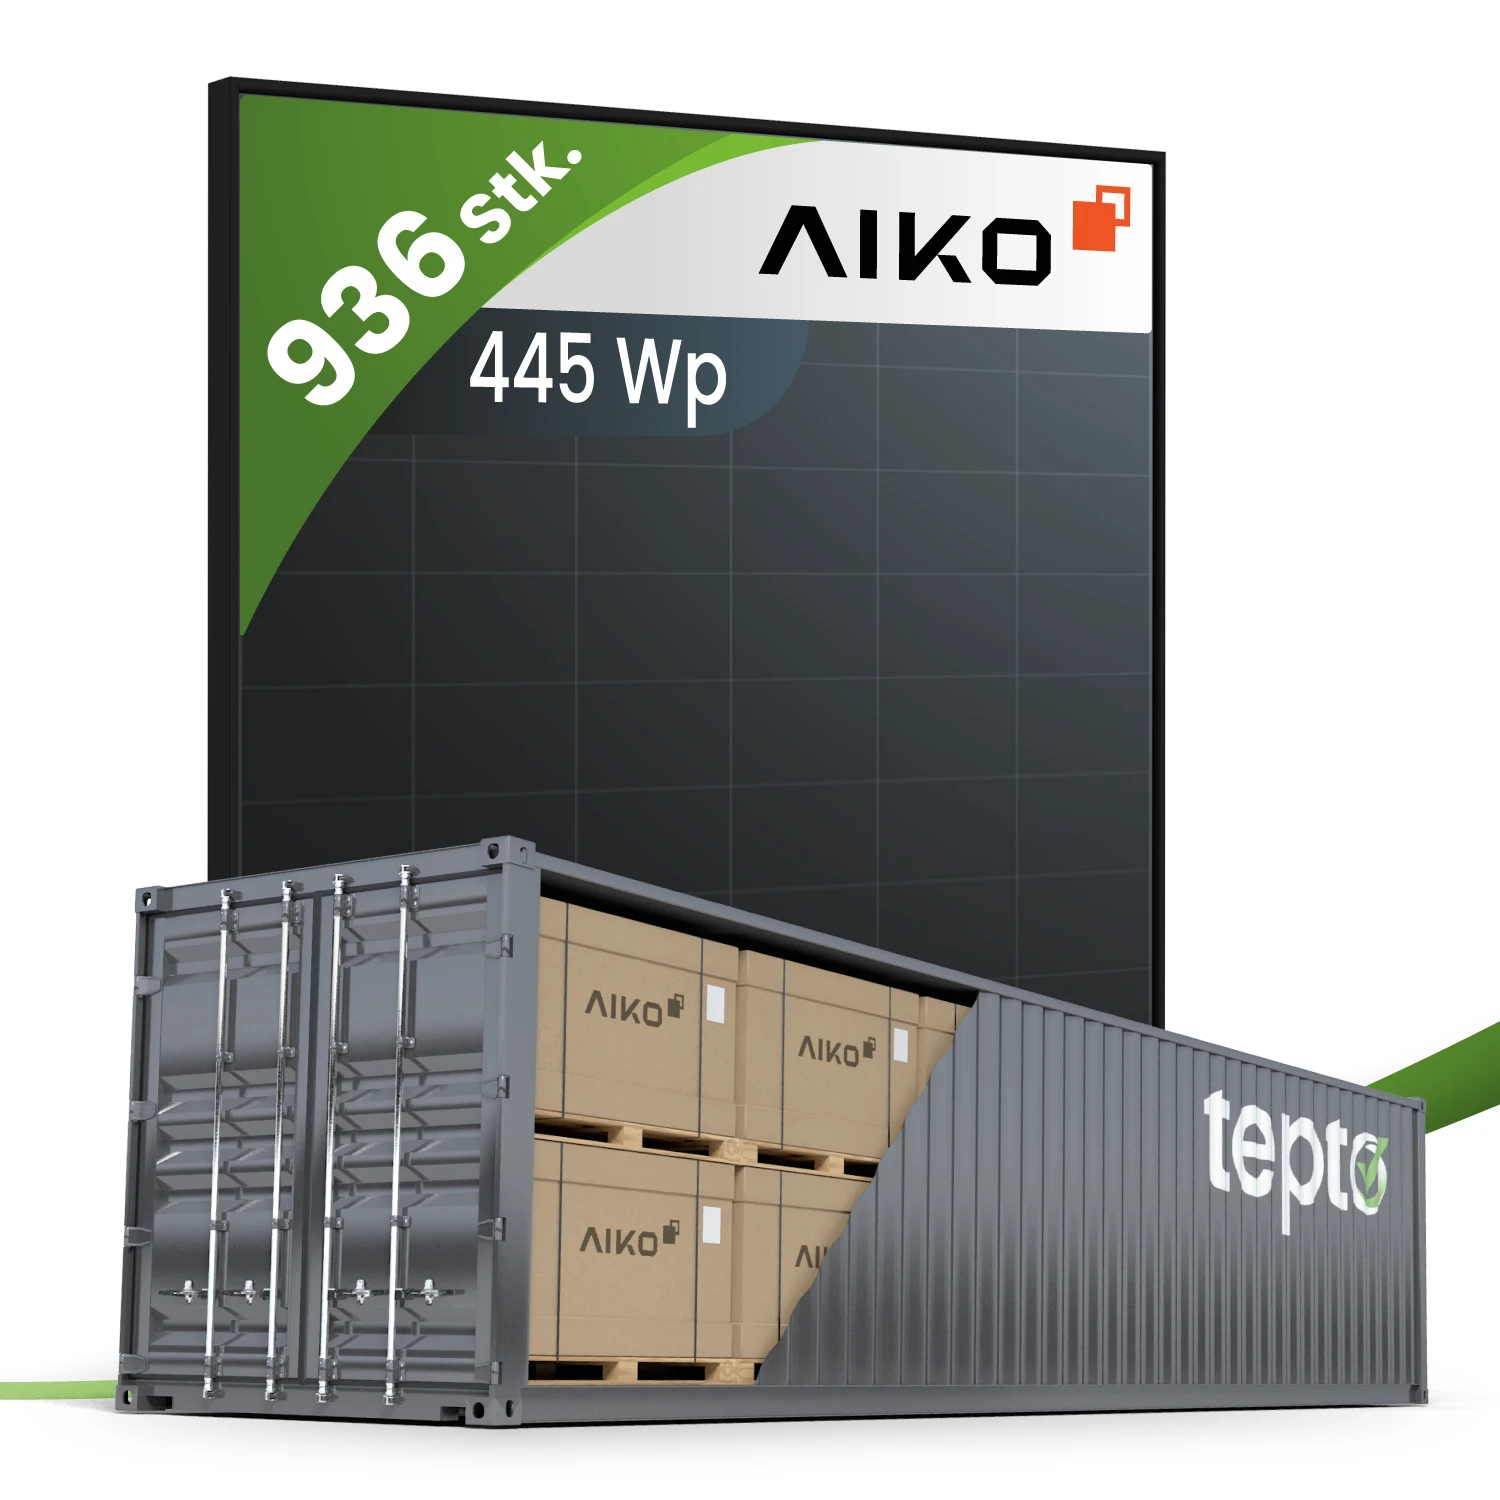 Aiko A445-MAH54Mb/445Wp Neostar 1S ABC N-Type Fullblack (Container)